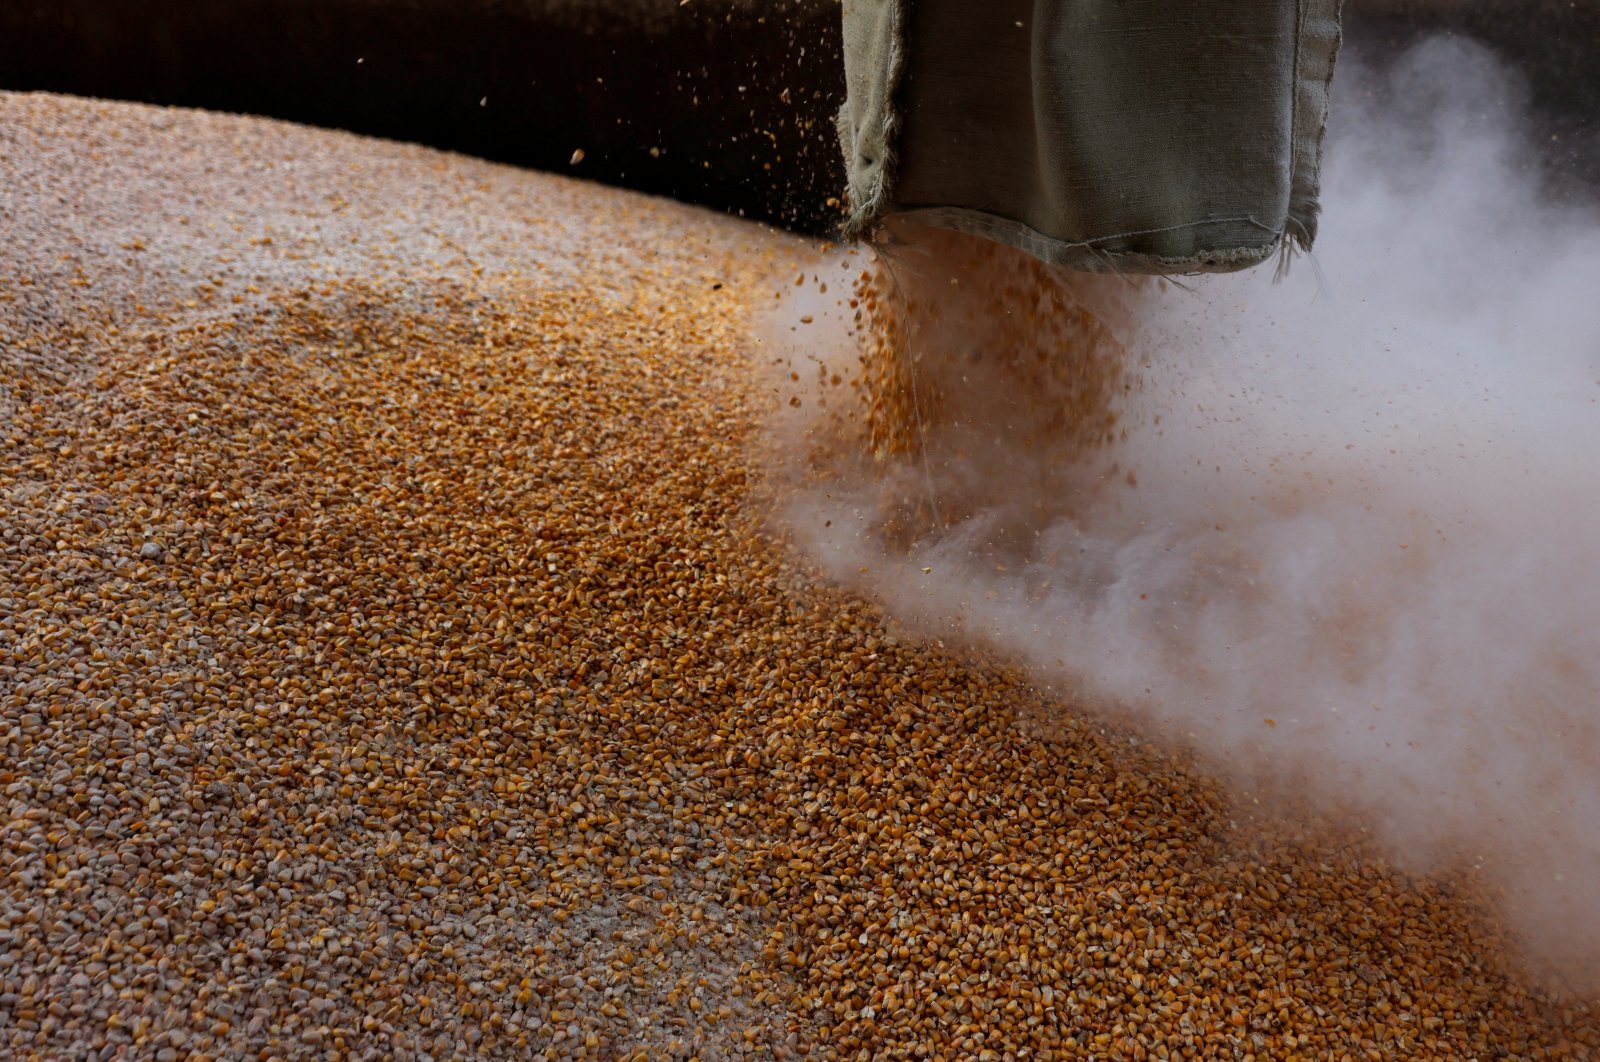 Grain is loaded on a truck at the Mlybor flour mill facility in Chernihiv region, Ukraine, May 24, 2022. (Reuters Photo)